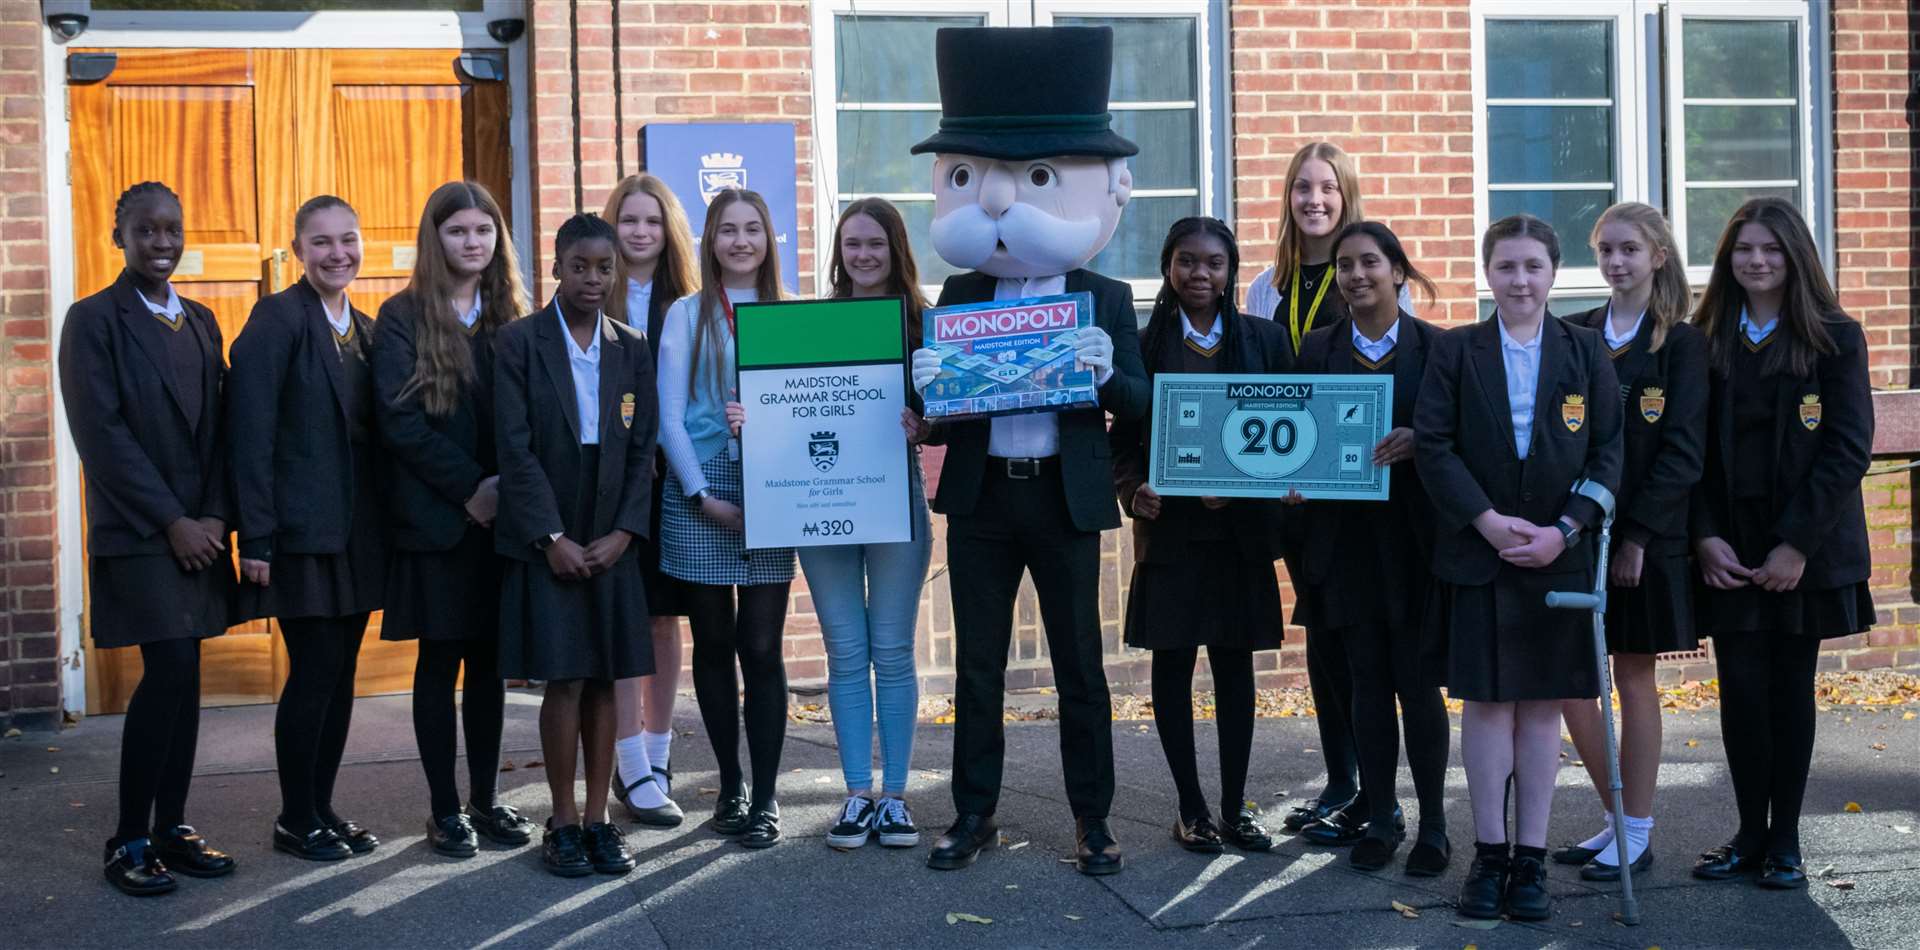 Pupils at Maidstone Grammar School for Girls celebrated with Mr Monopoly himself. Picture: MGGS